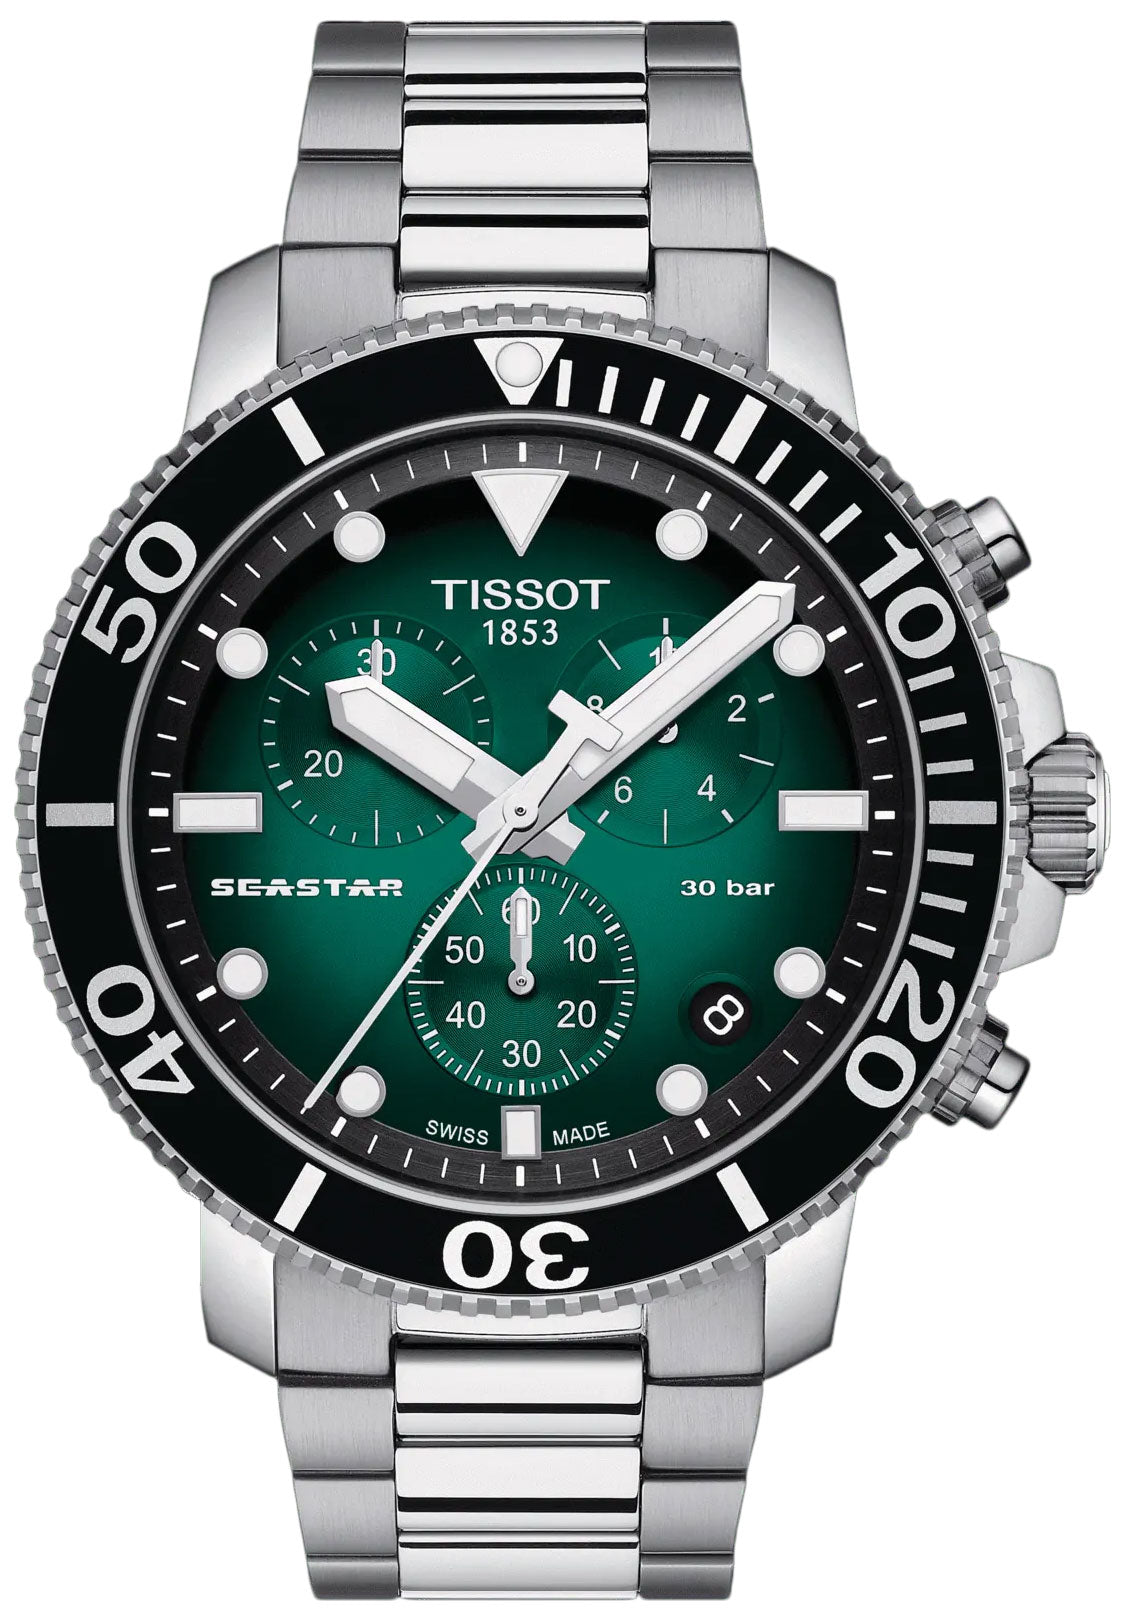 update alt-text with template Watches - Mens-Tissot-T120.417.11.091.01-45 - 50 mm, date, divers, green, mens, menswatches, new arrivals, round, rpSKU_T120.407.11.091.00, Seastar, stainless steel band, stainless steel case, swiss quartz, Tissot, unidirectional rotating bezel, watches-Watches & Beyond